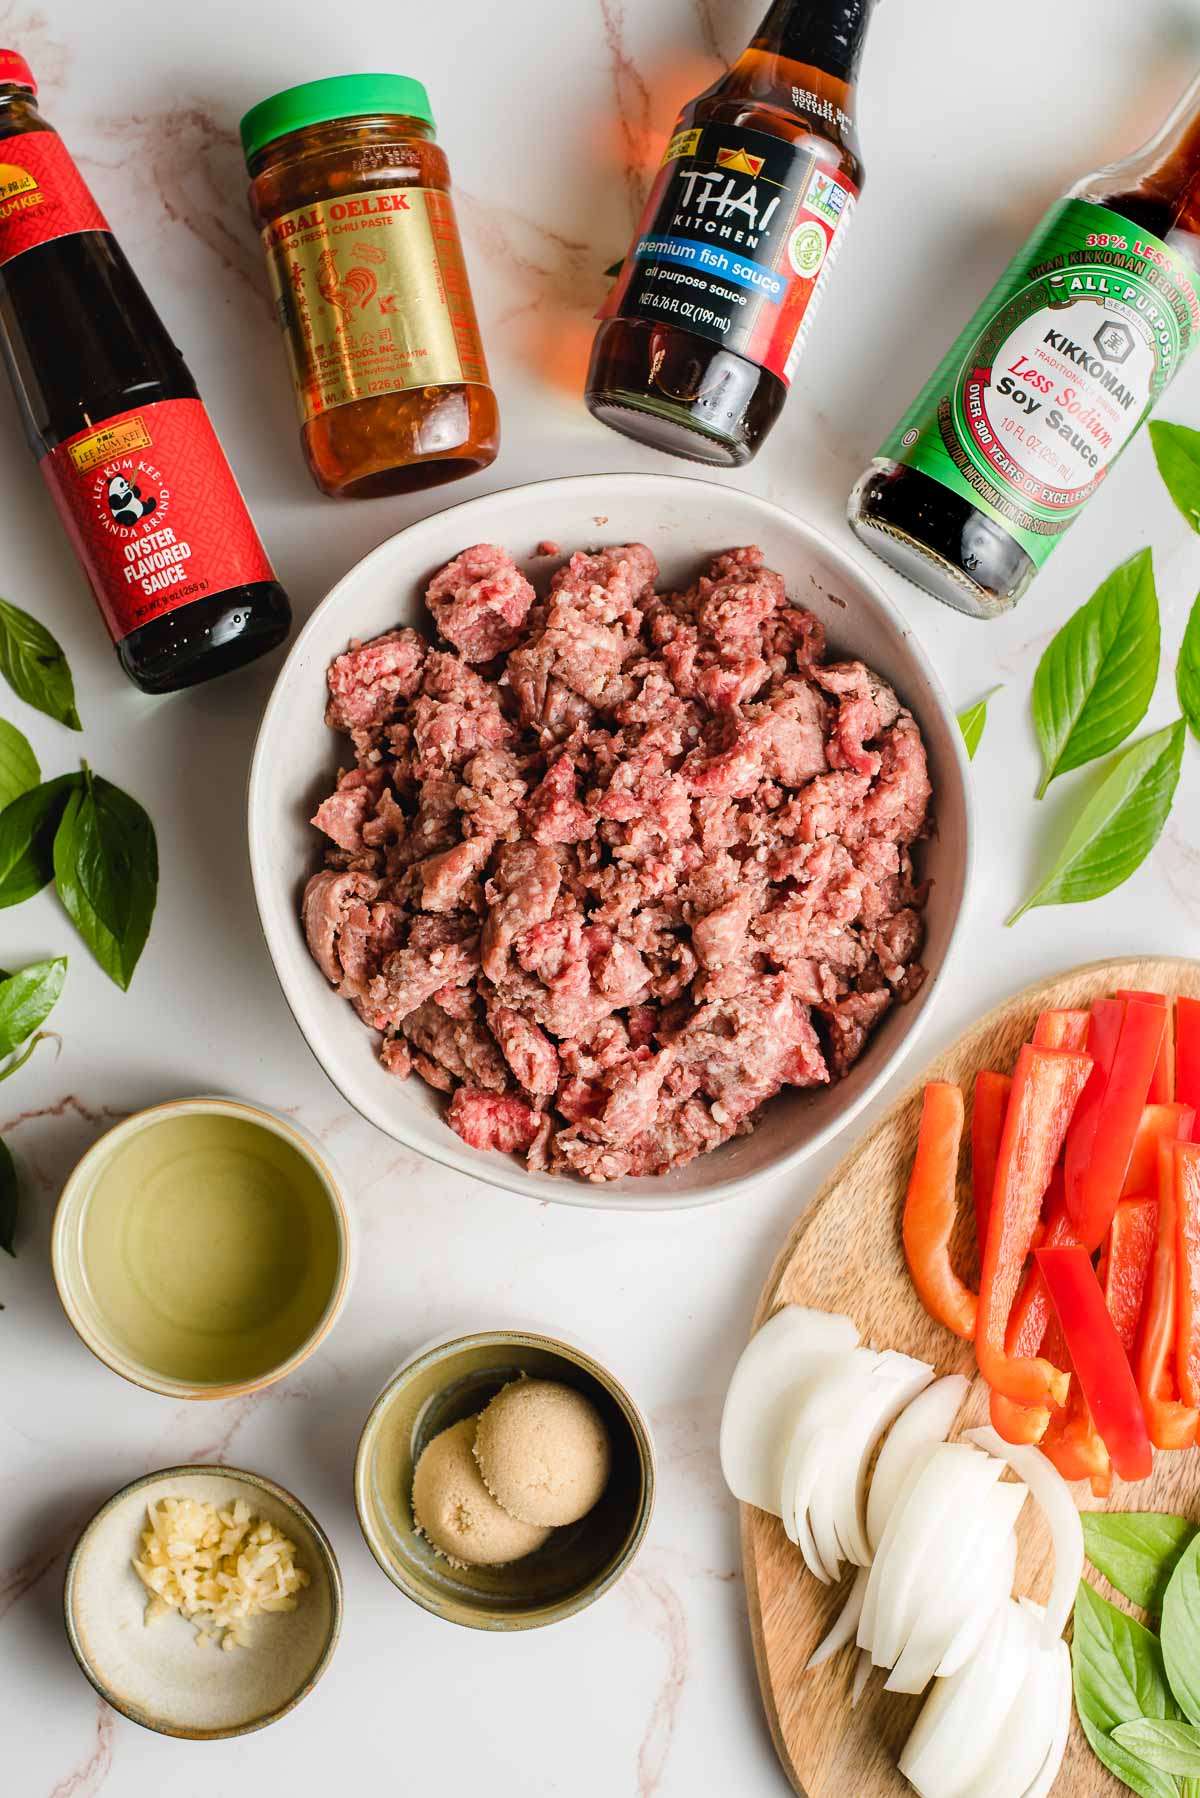 All the ingredients needed to make Thai Basil Beef.